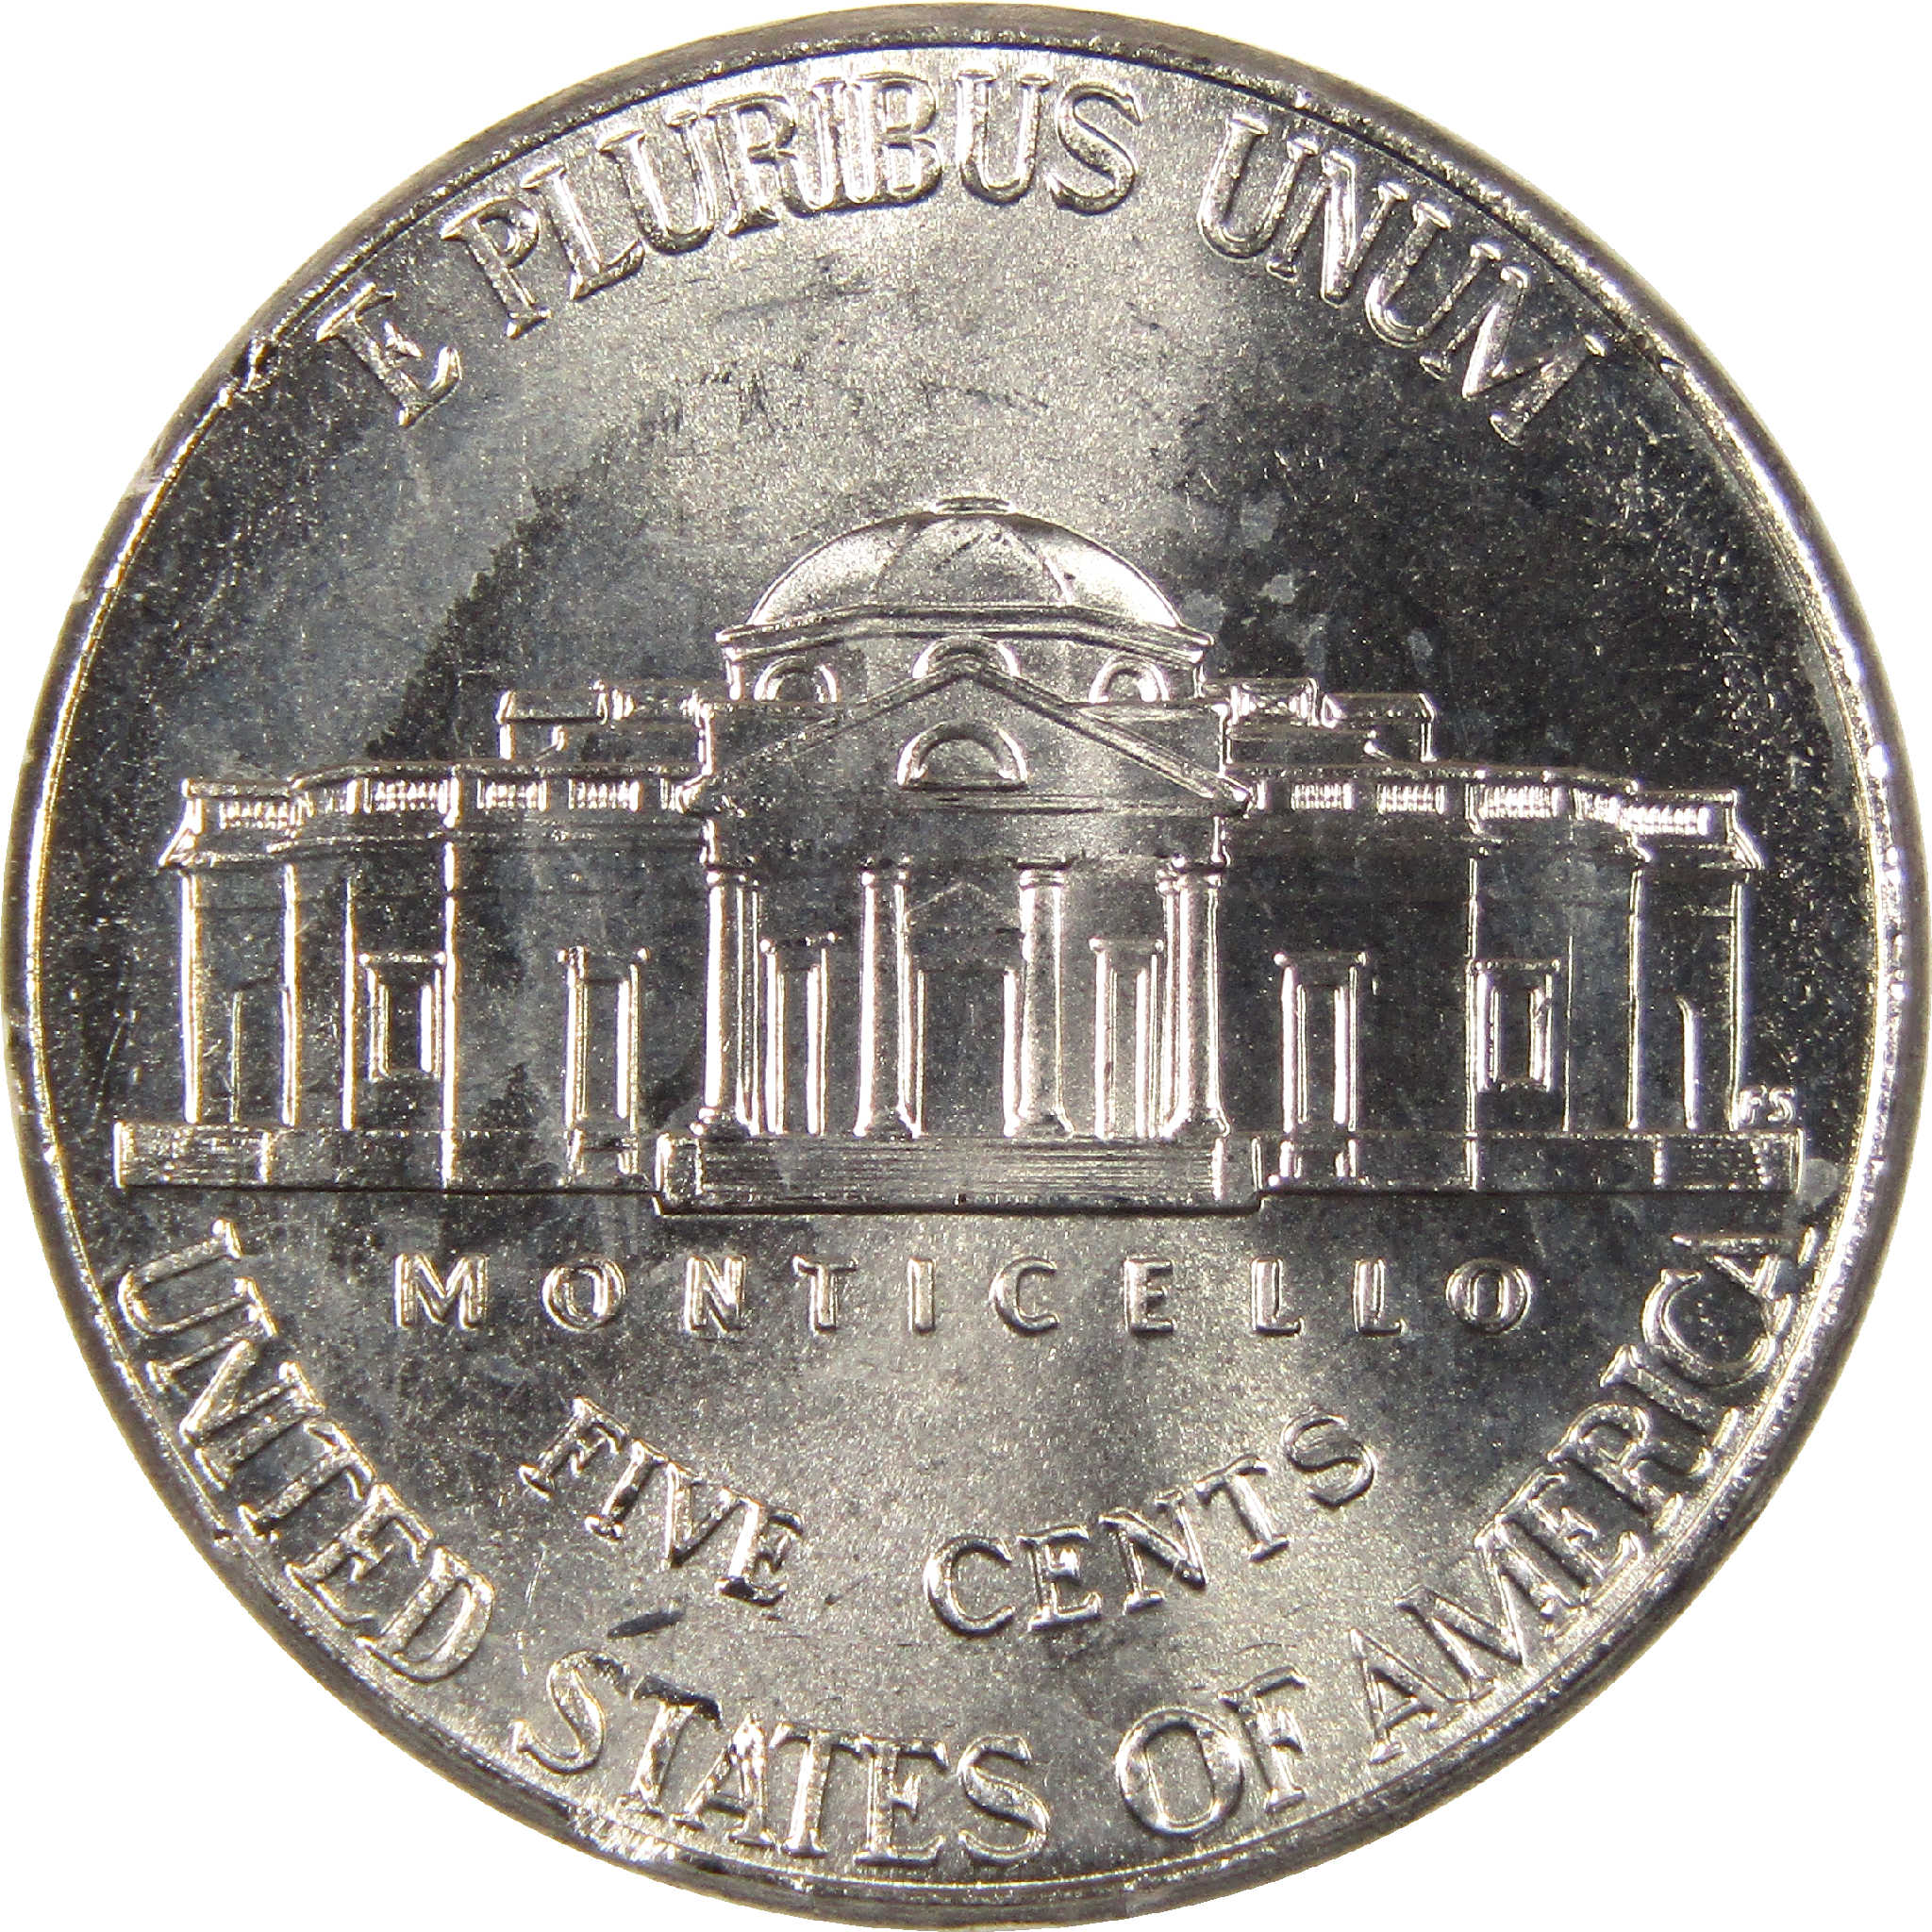 2013 P Jefferson Nickel Uncirculated 5c Coin